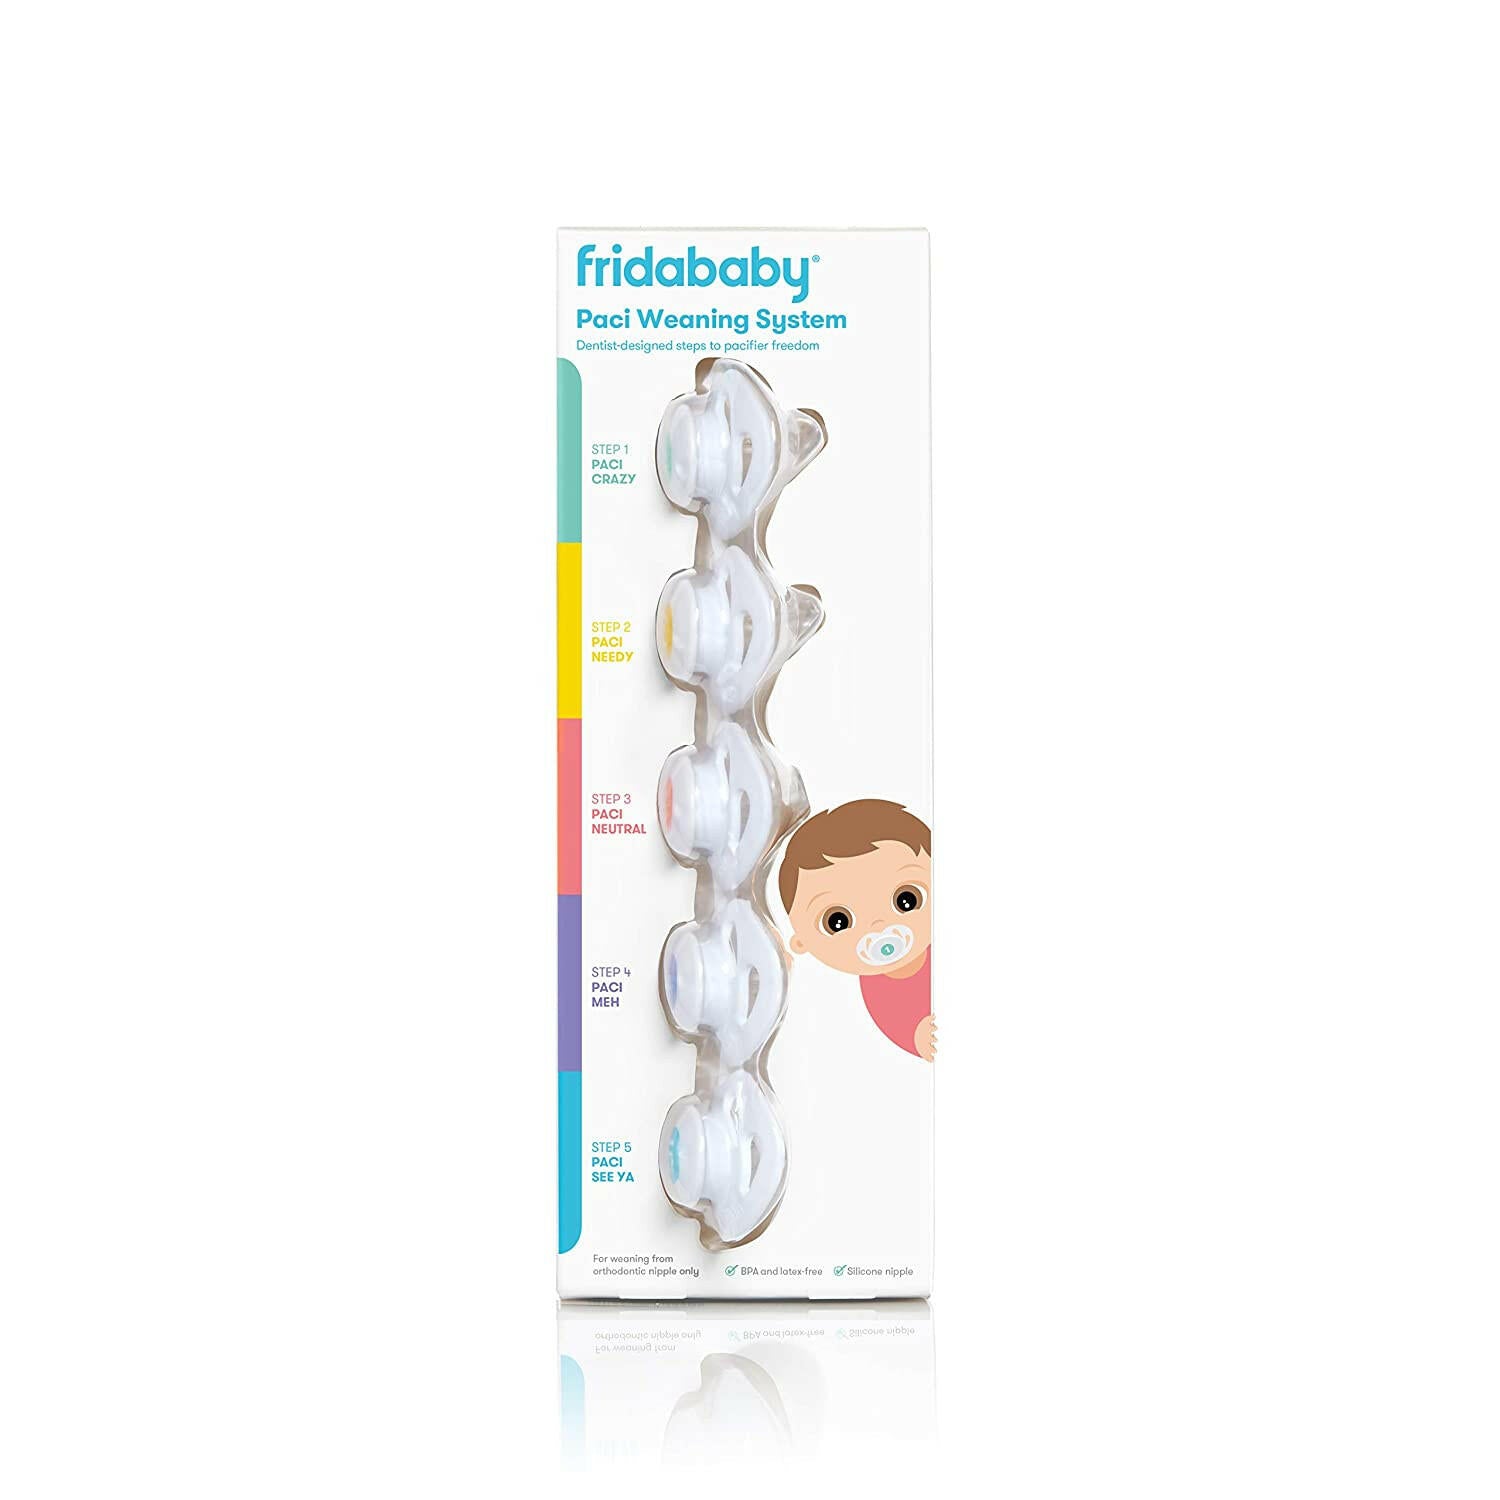 Frida Baby Paci Weaning System.